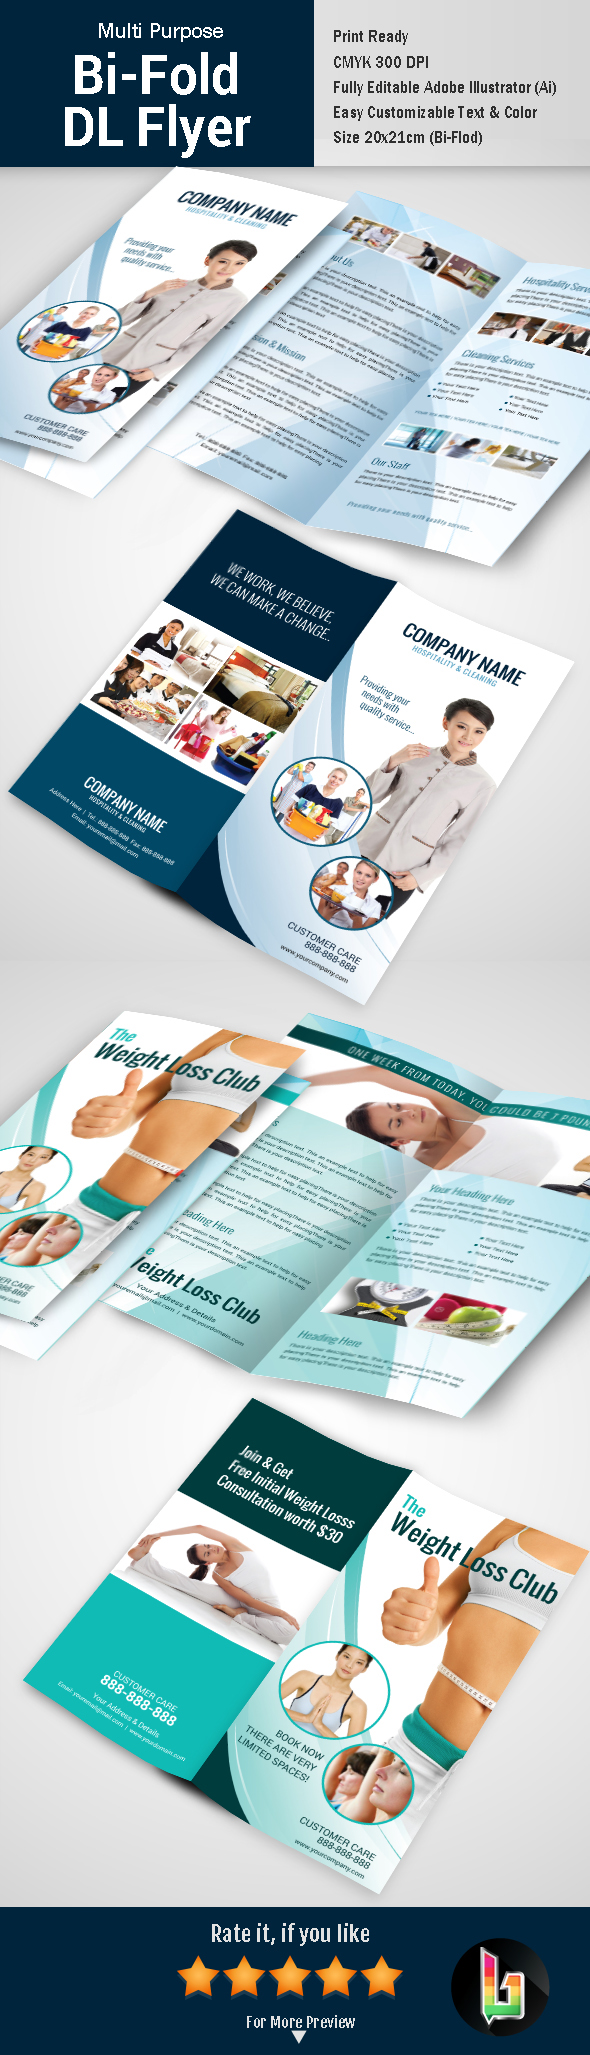 belly bifold body body builing brochure care catering clean cleaning cloth club DL flyer excersise fitness flyer